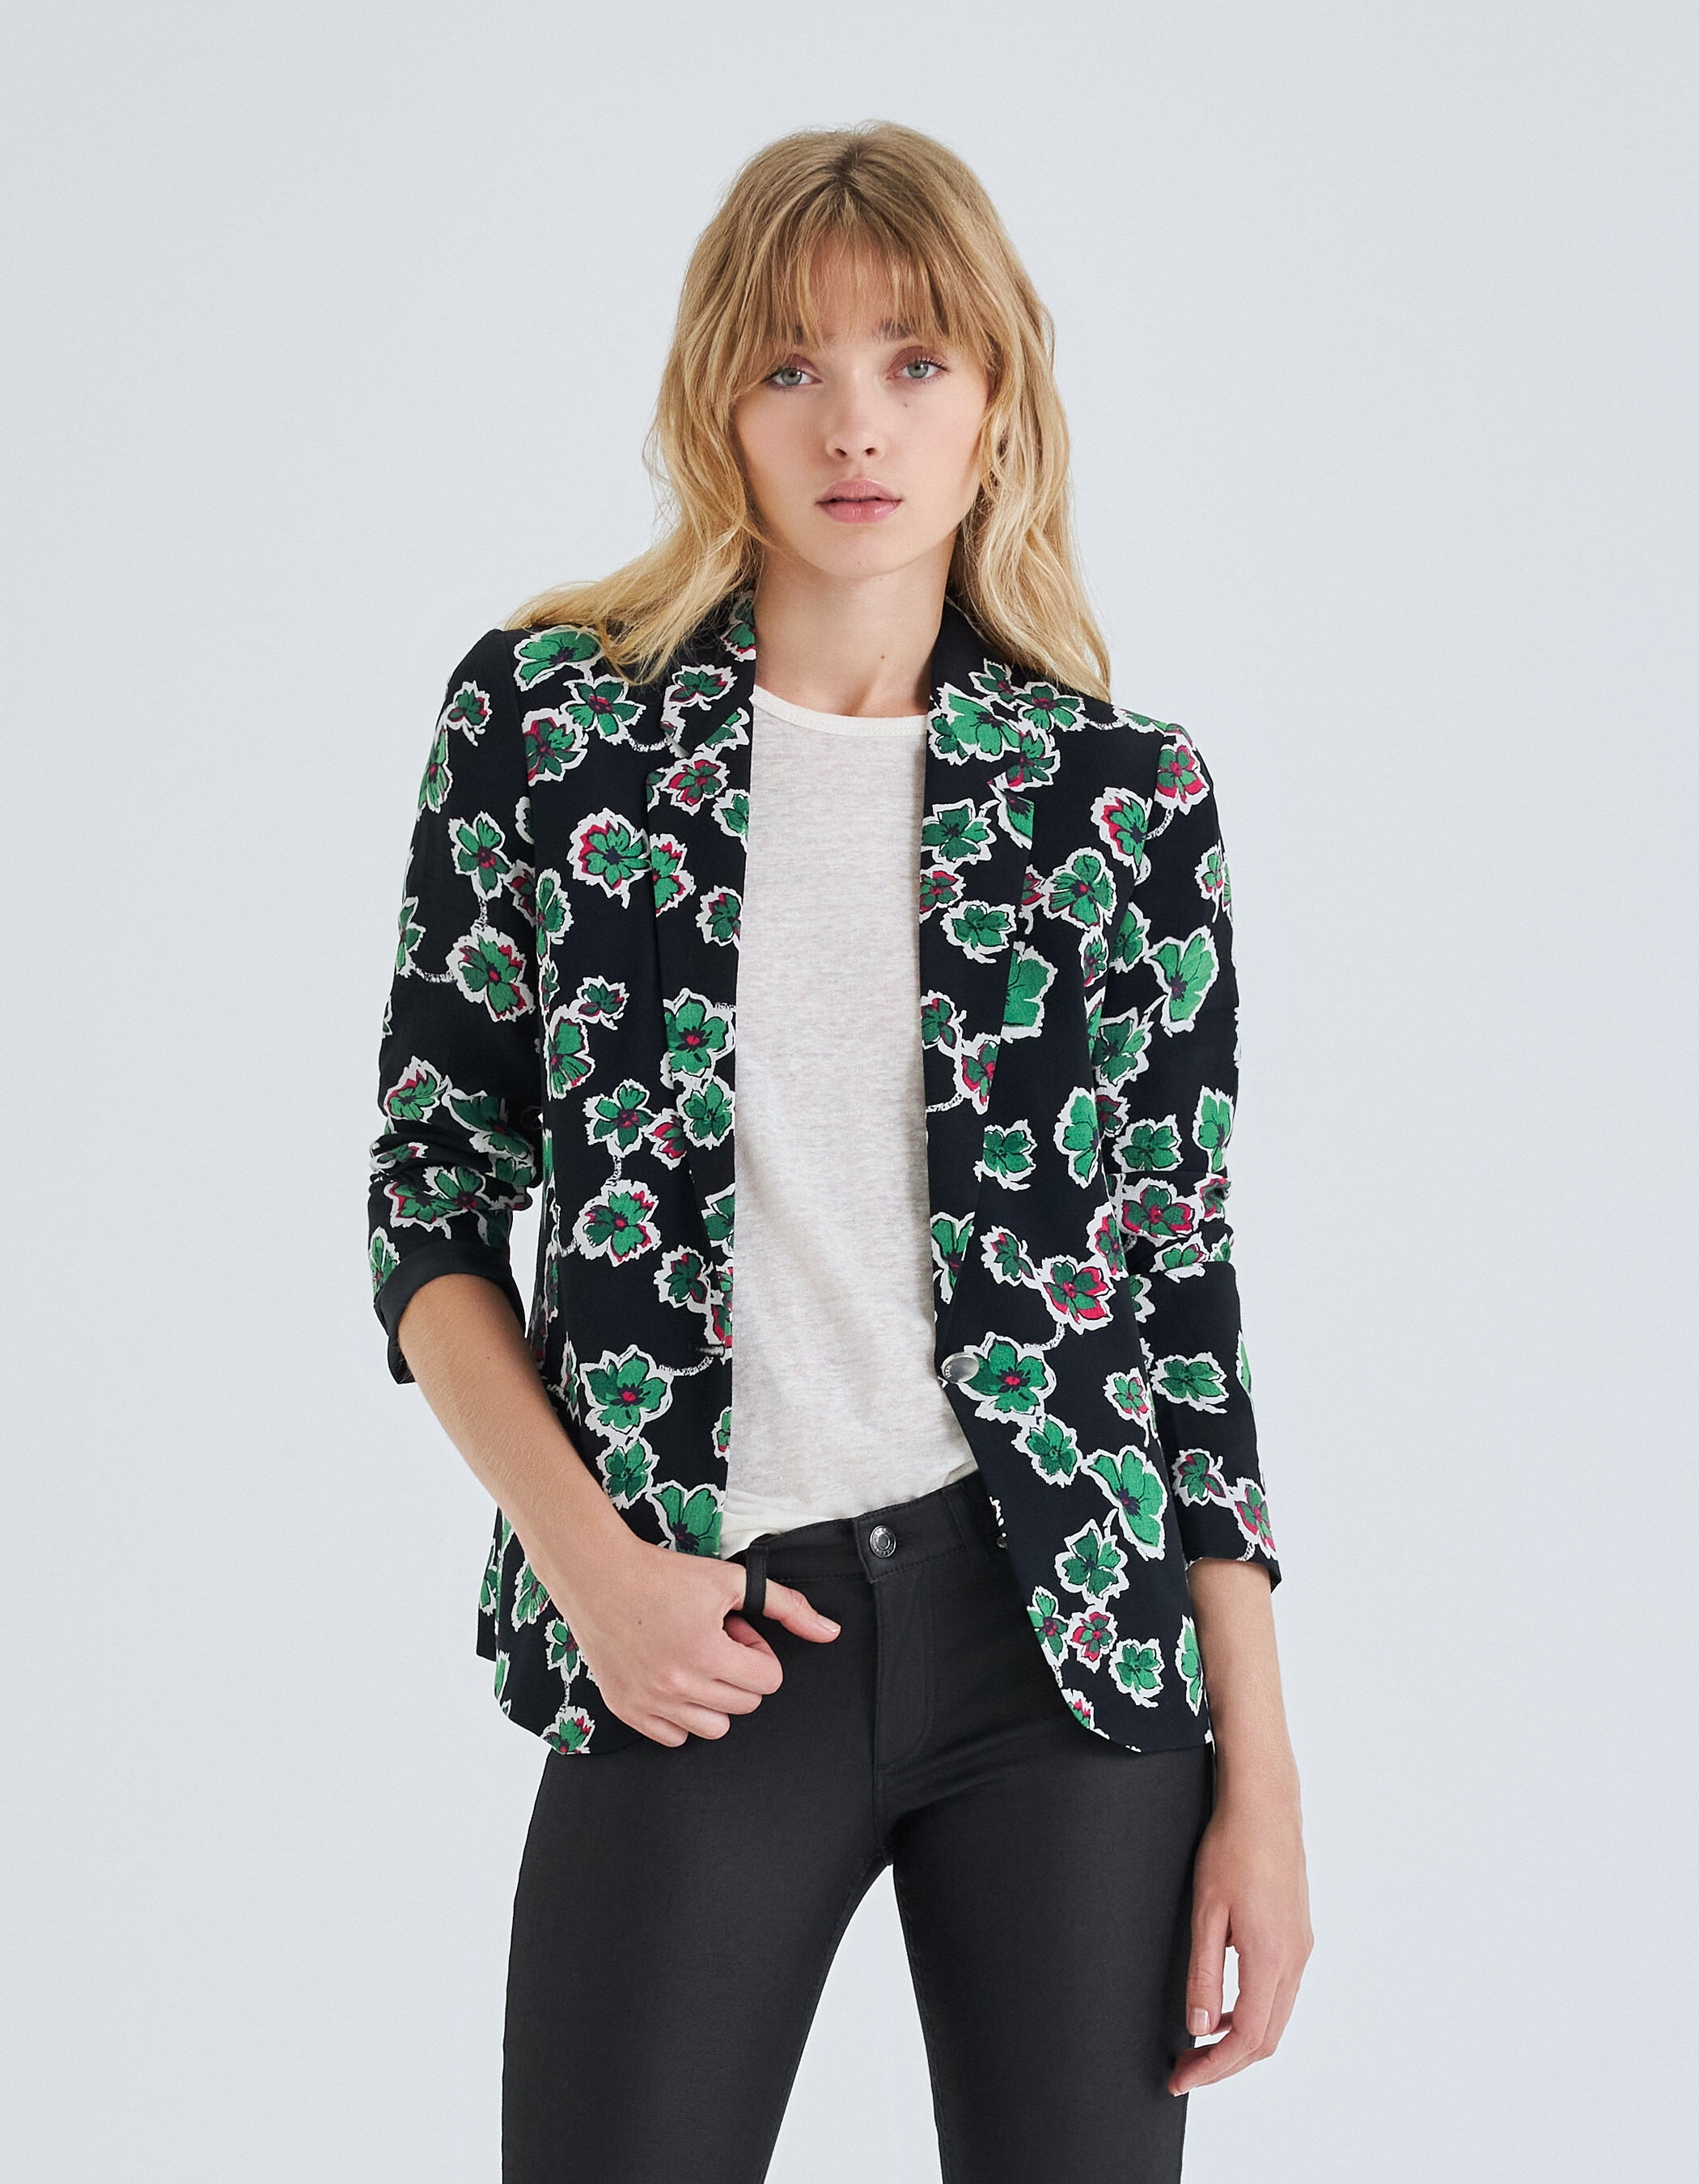 Women's black suit jacket with green flowers print